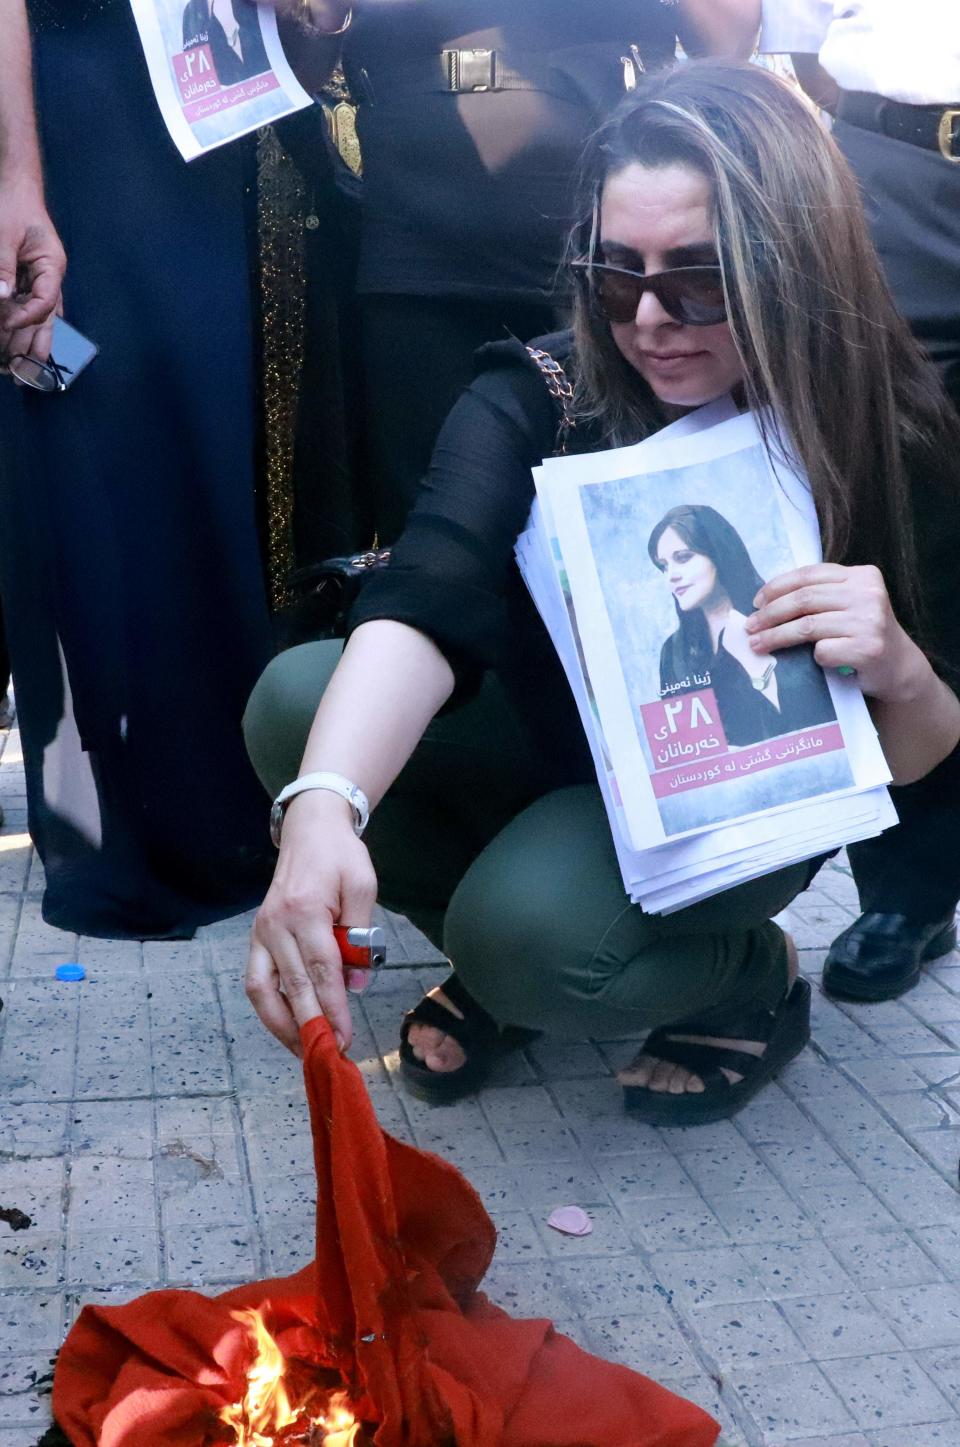 Iranian Kurds set a headscarf on fire during a march in a park in the Iraq Kurdish city of Sulaimaniya on September 19, 2022, against the killing of of Mahsa Amini, a woman in Iran who died after being arrested by the Islamic republic's &quot;morality police&quot;.